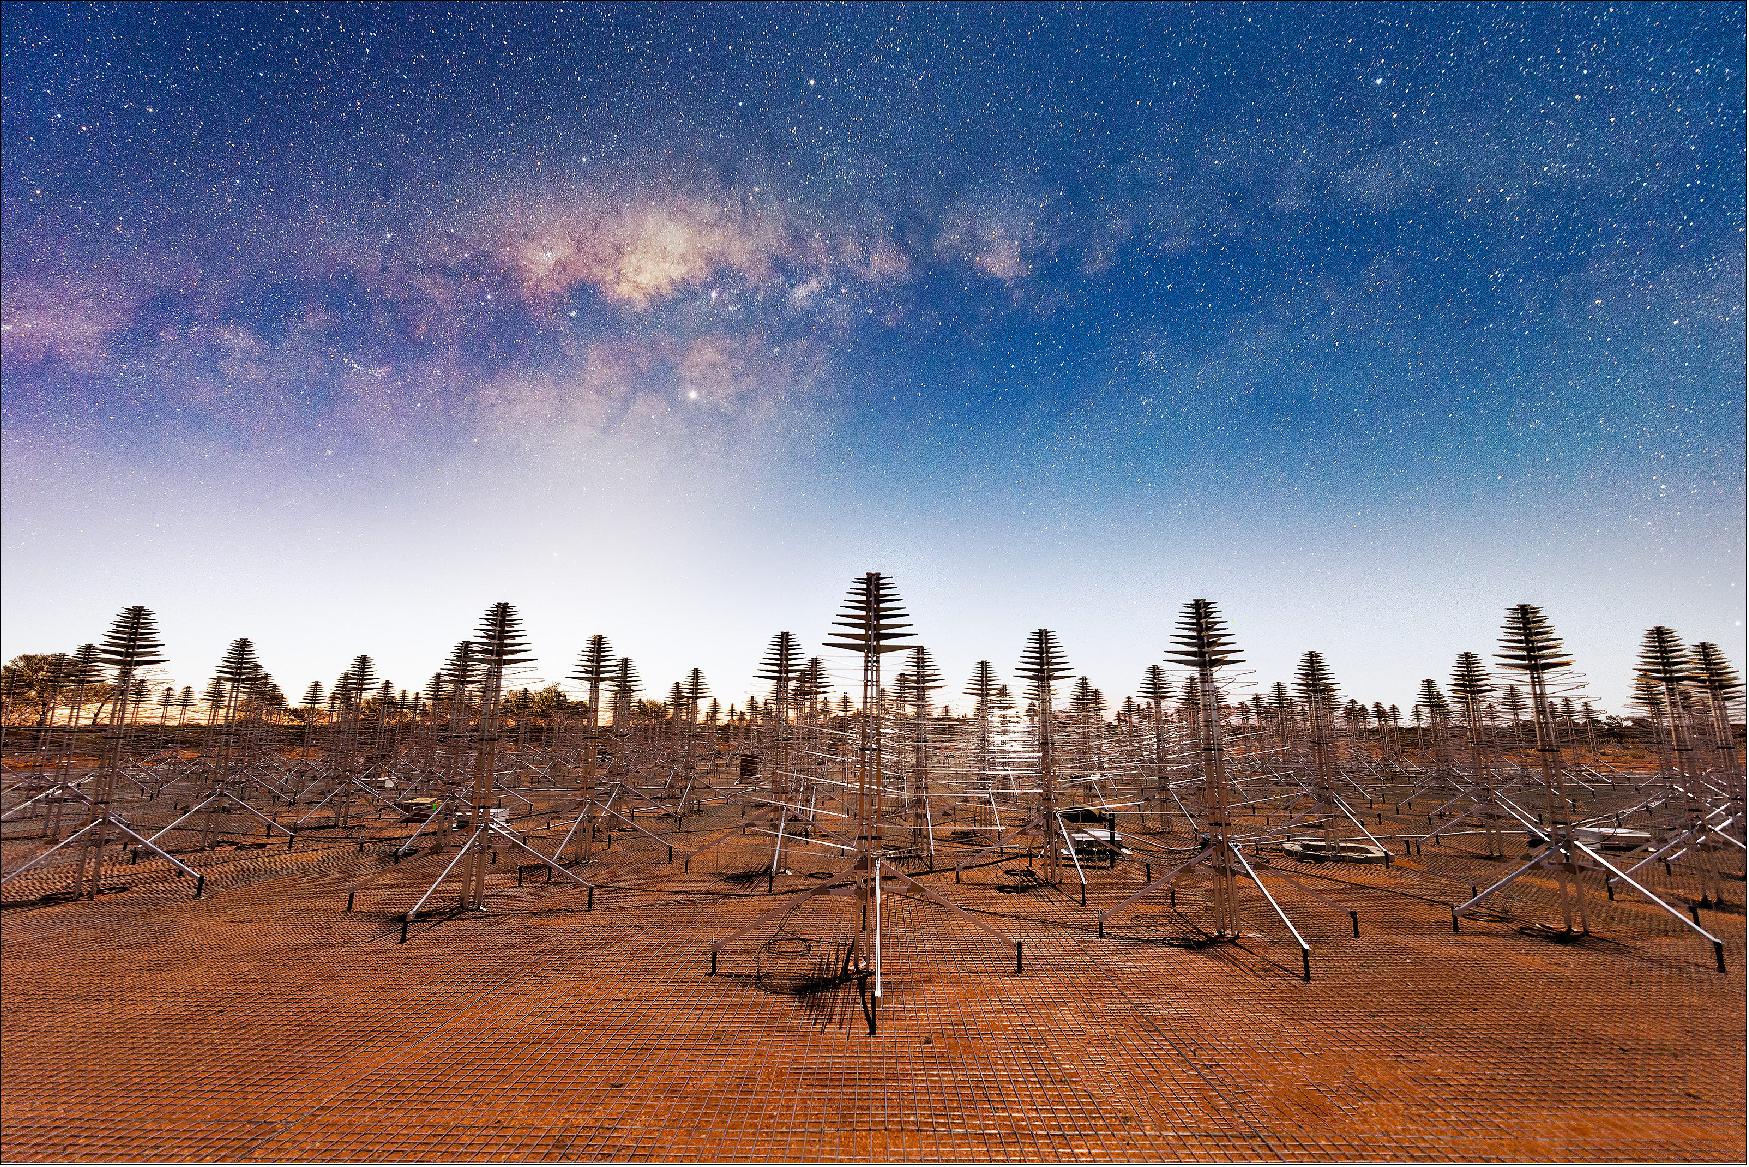 Figure 46: A 20-second exposure showing the Milky Way overhead the AAVS station (image credit: Michael Goh and ICRAR/Curtin)